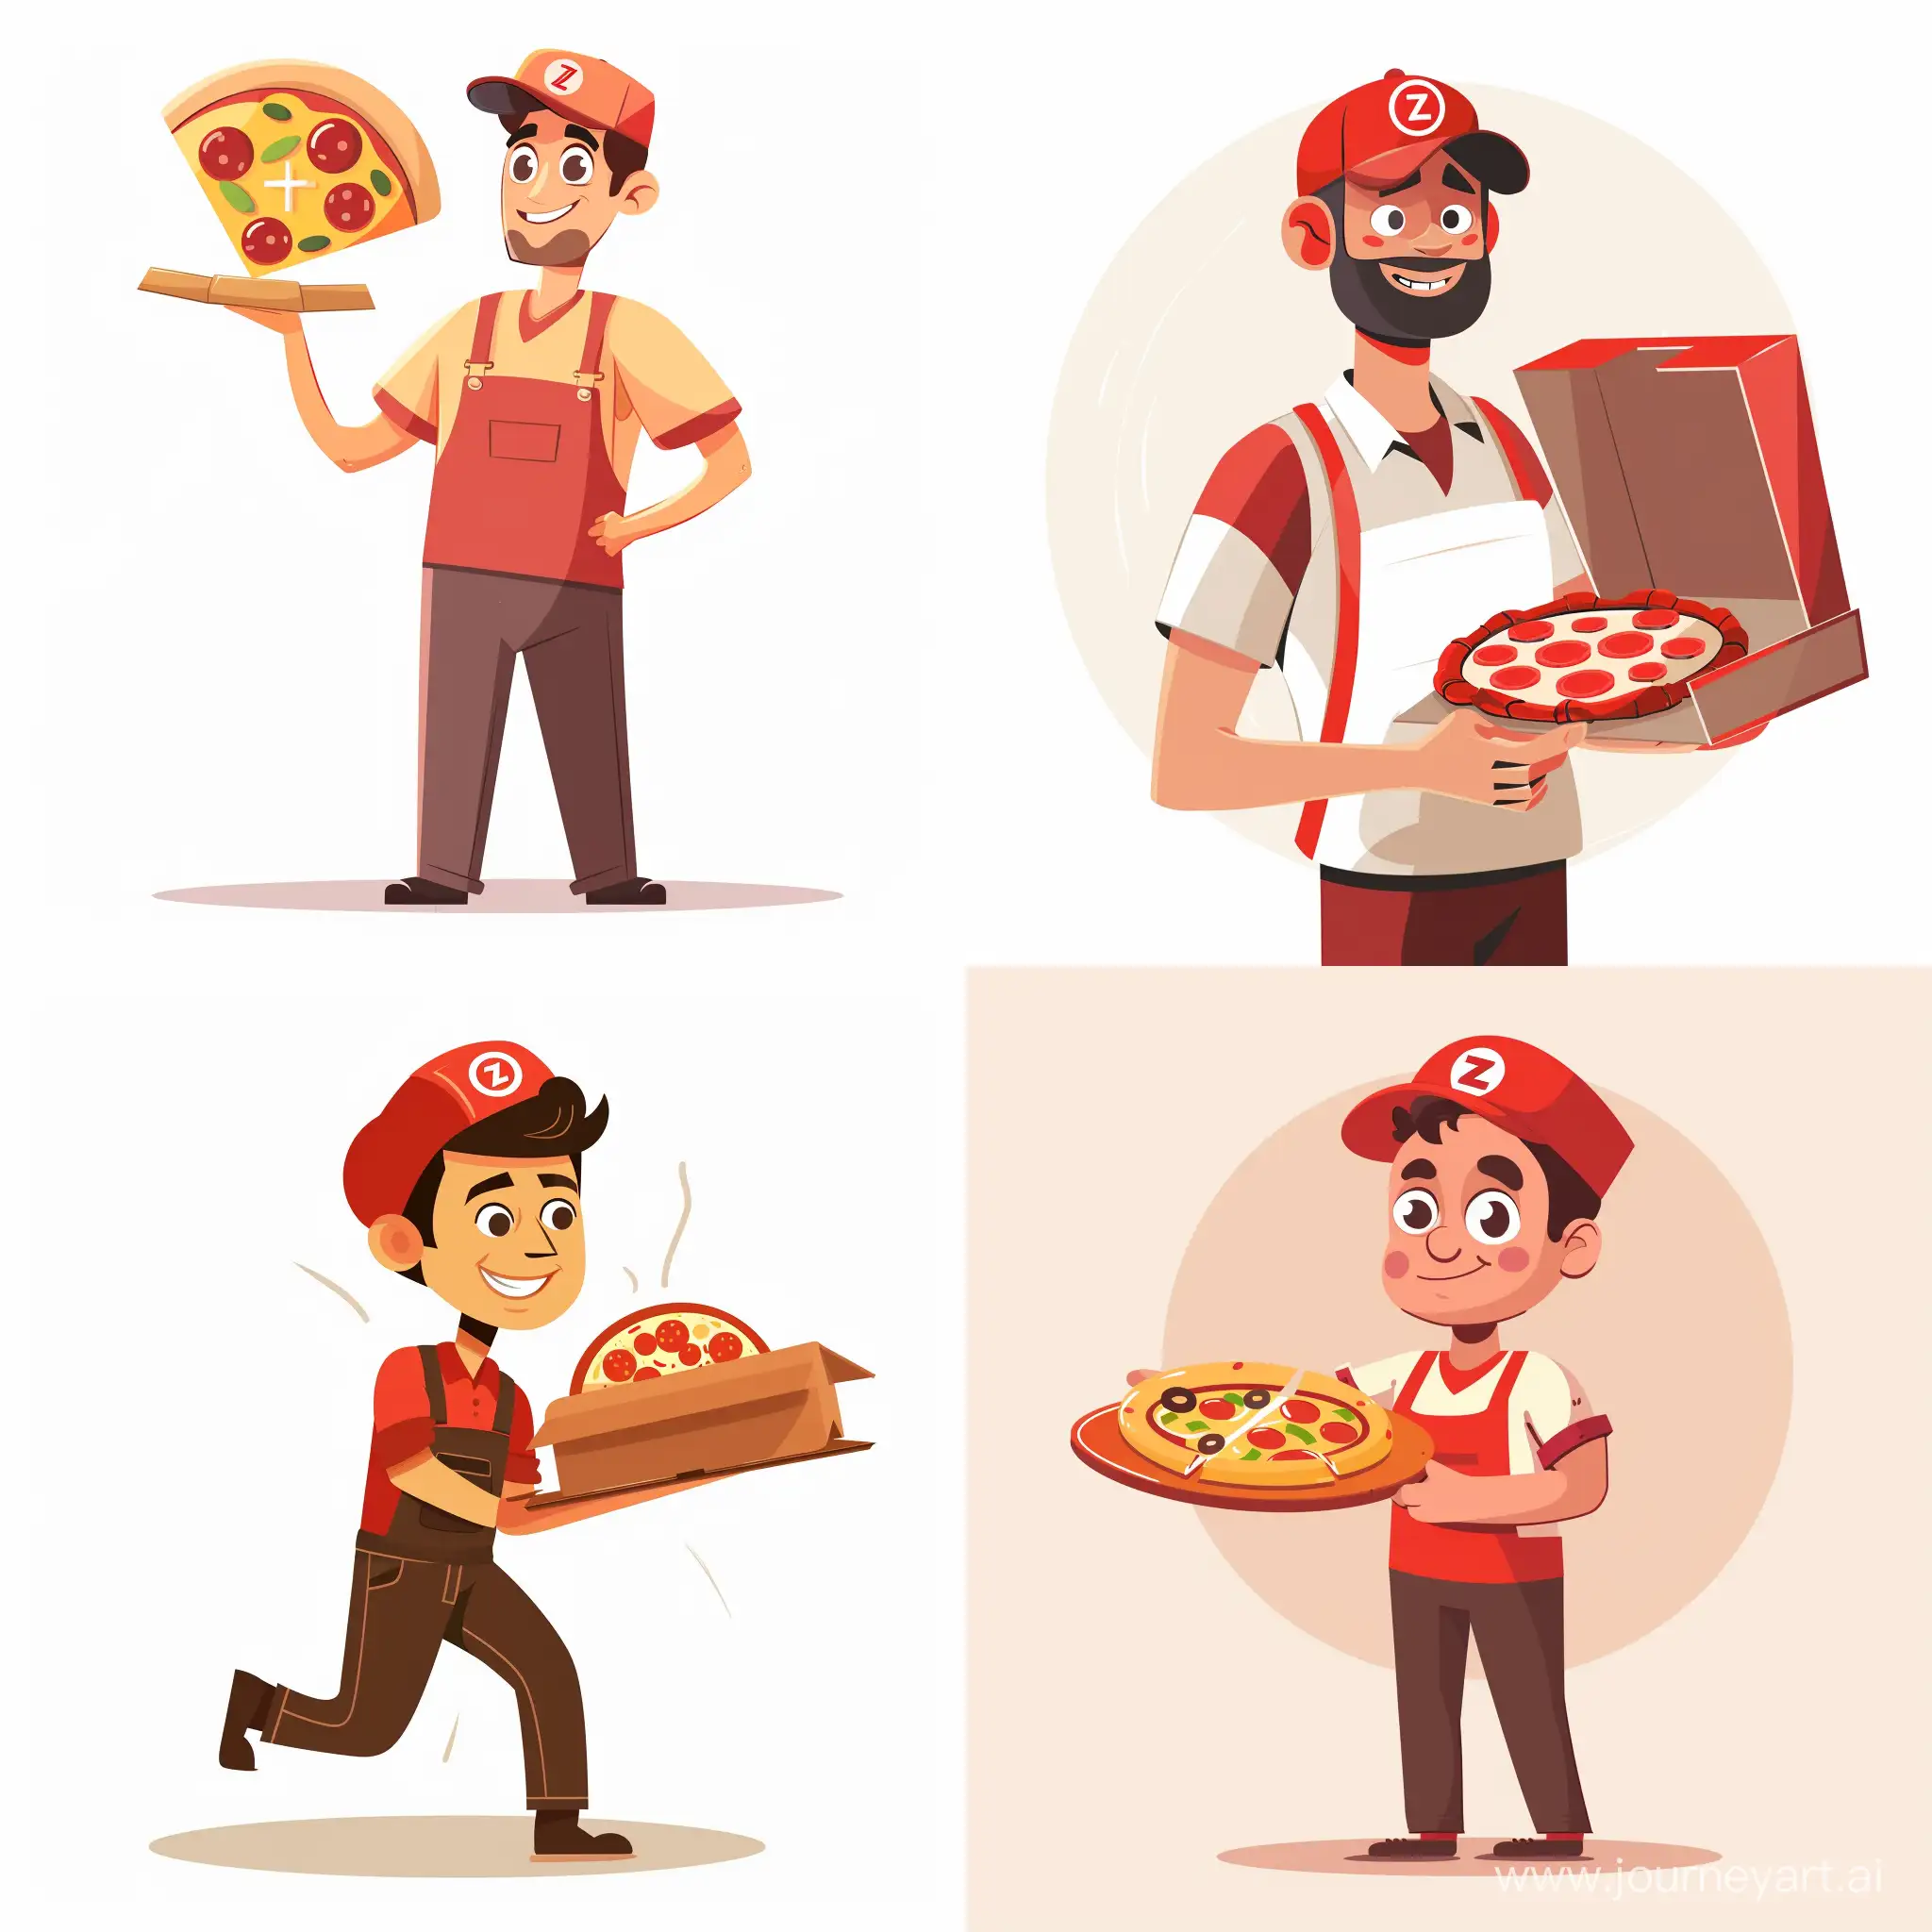 Cheerful-Pizza-Delivery-Man-in-Vibrant-Cartoon-Style